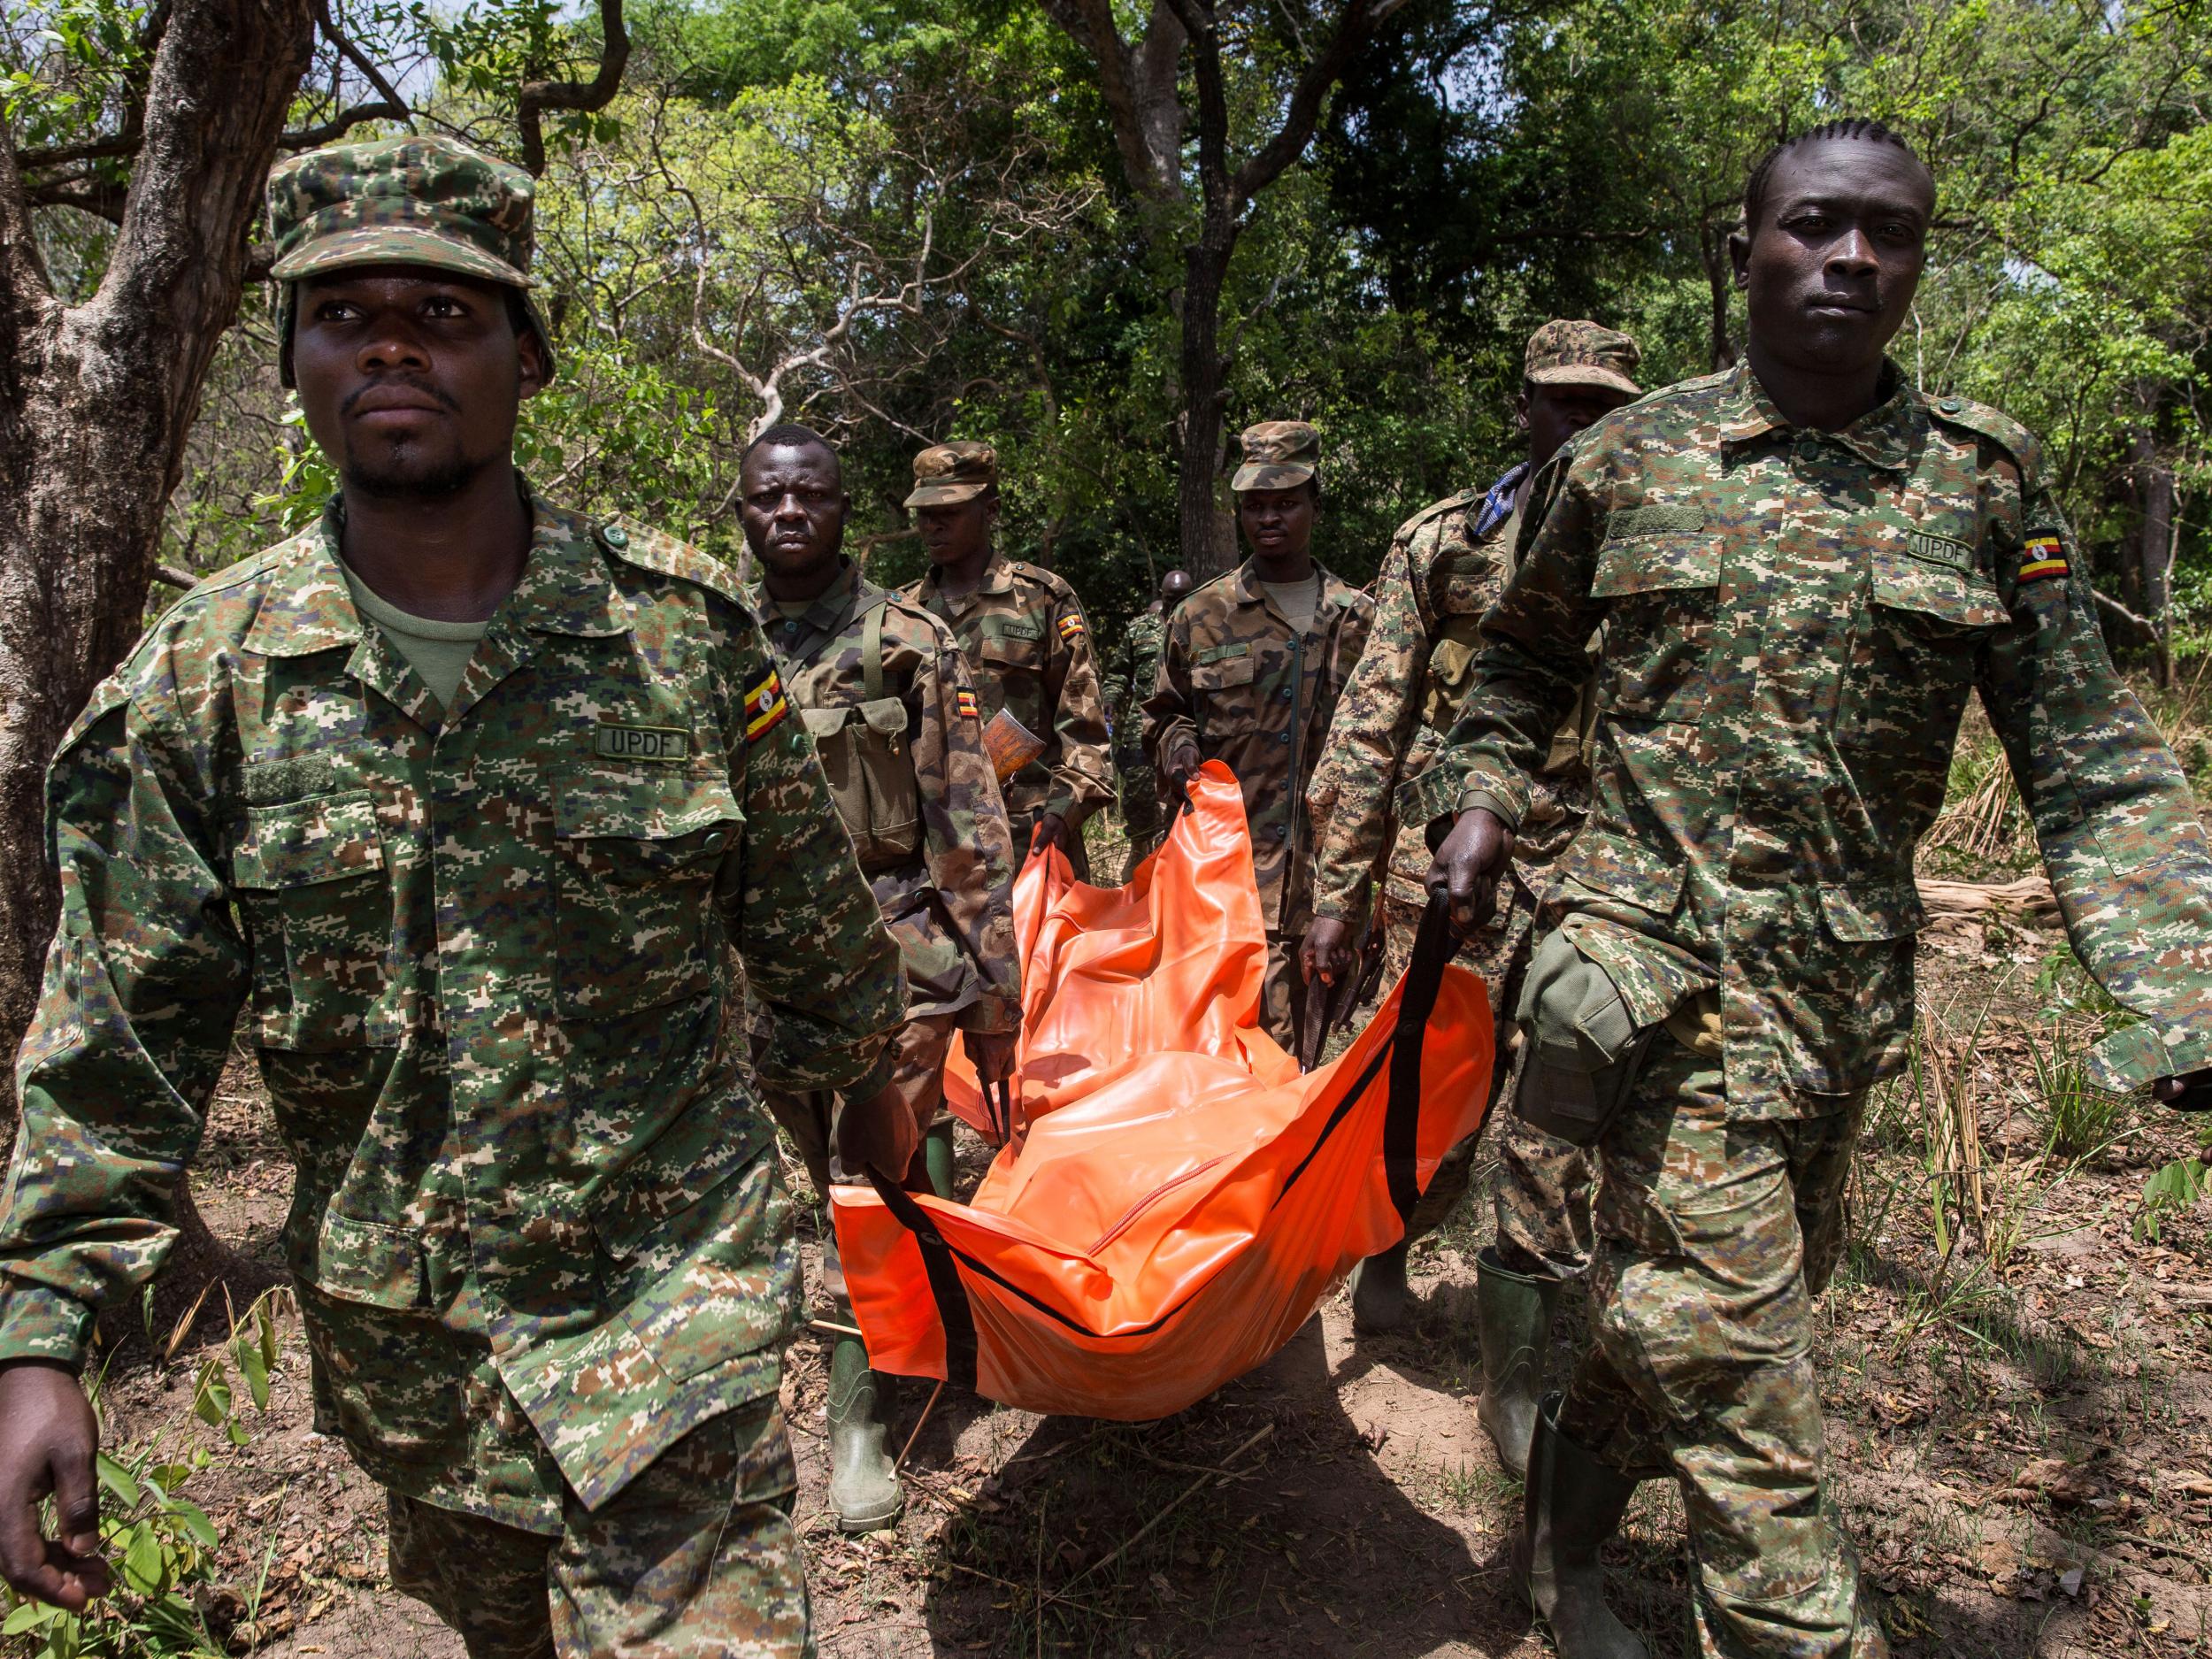 Ugandan troops in Central African Republic exhume the remains of top Lord's Resistance Army commander Okot Odhiambo